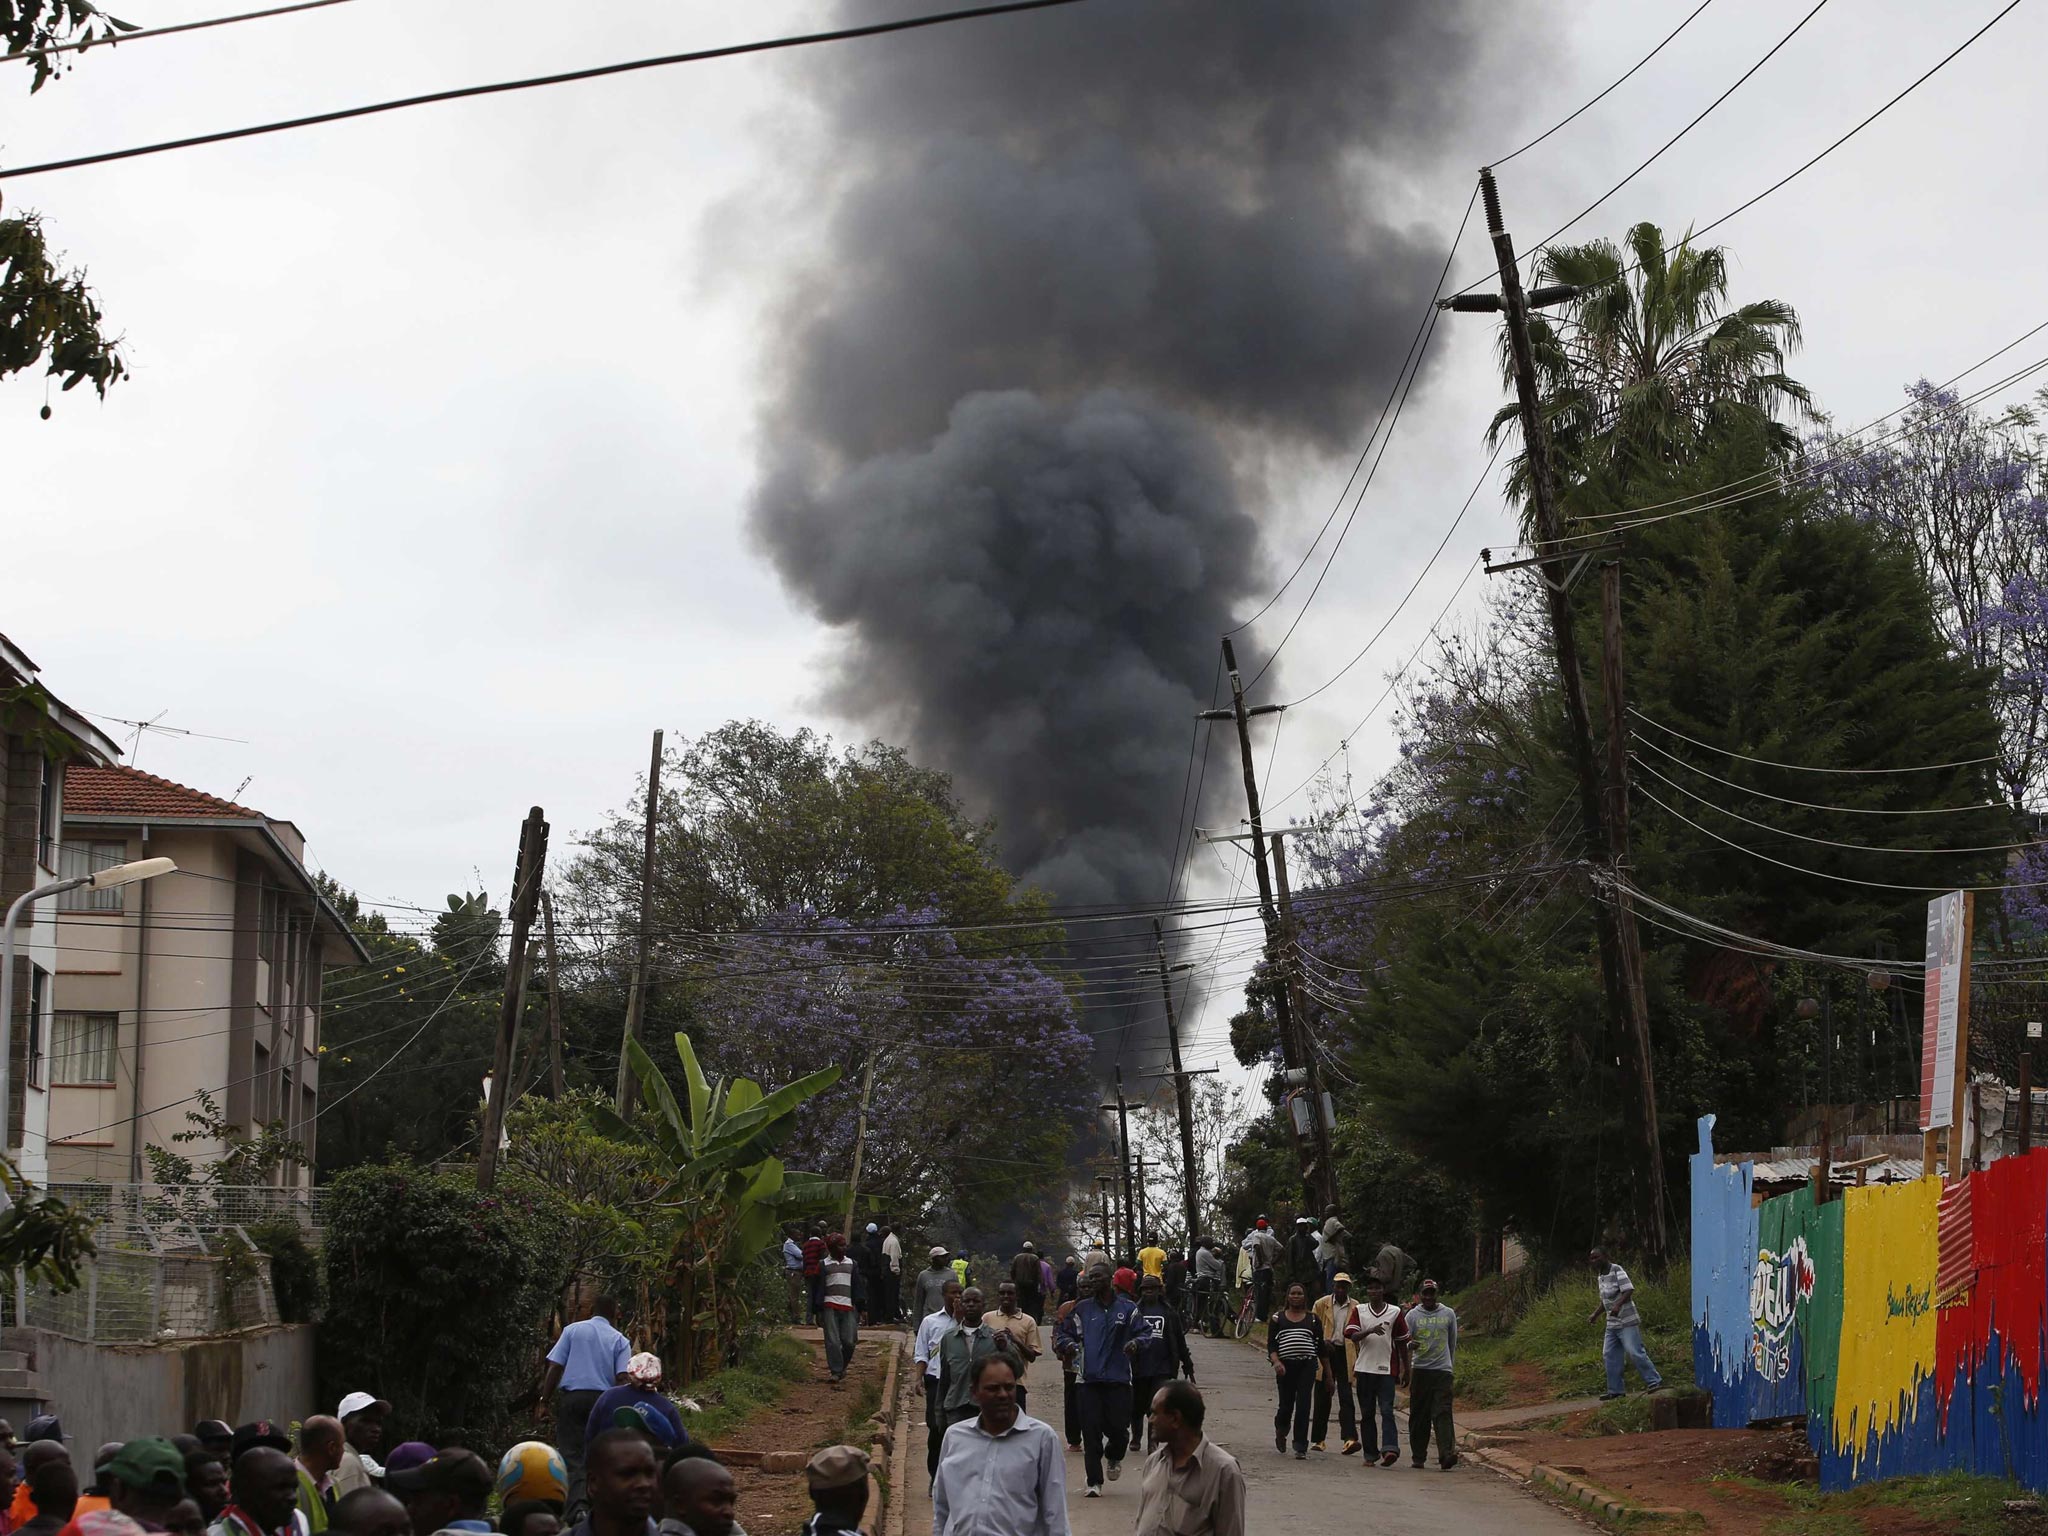 Smoke rises over Westgate Shopping Centre after an explosion in Nairobi